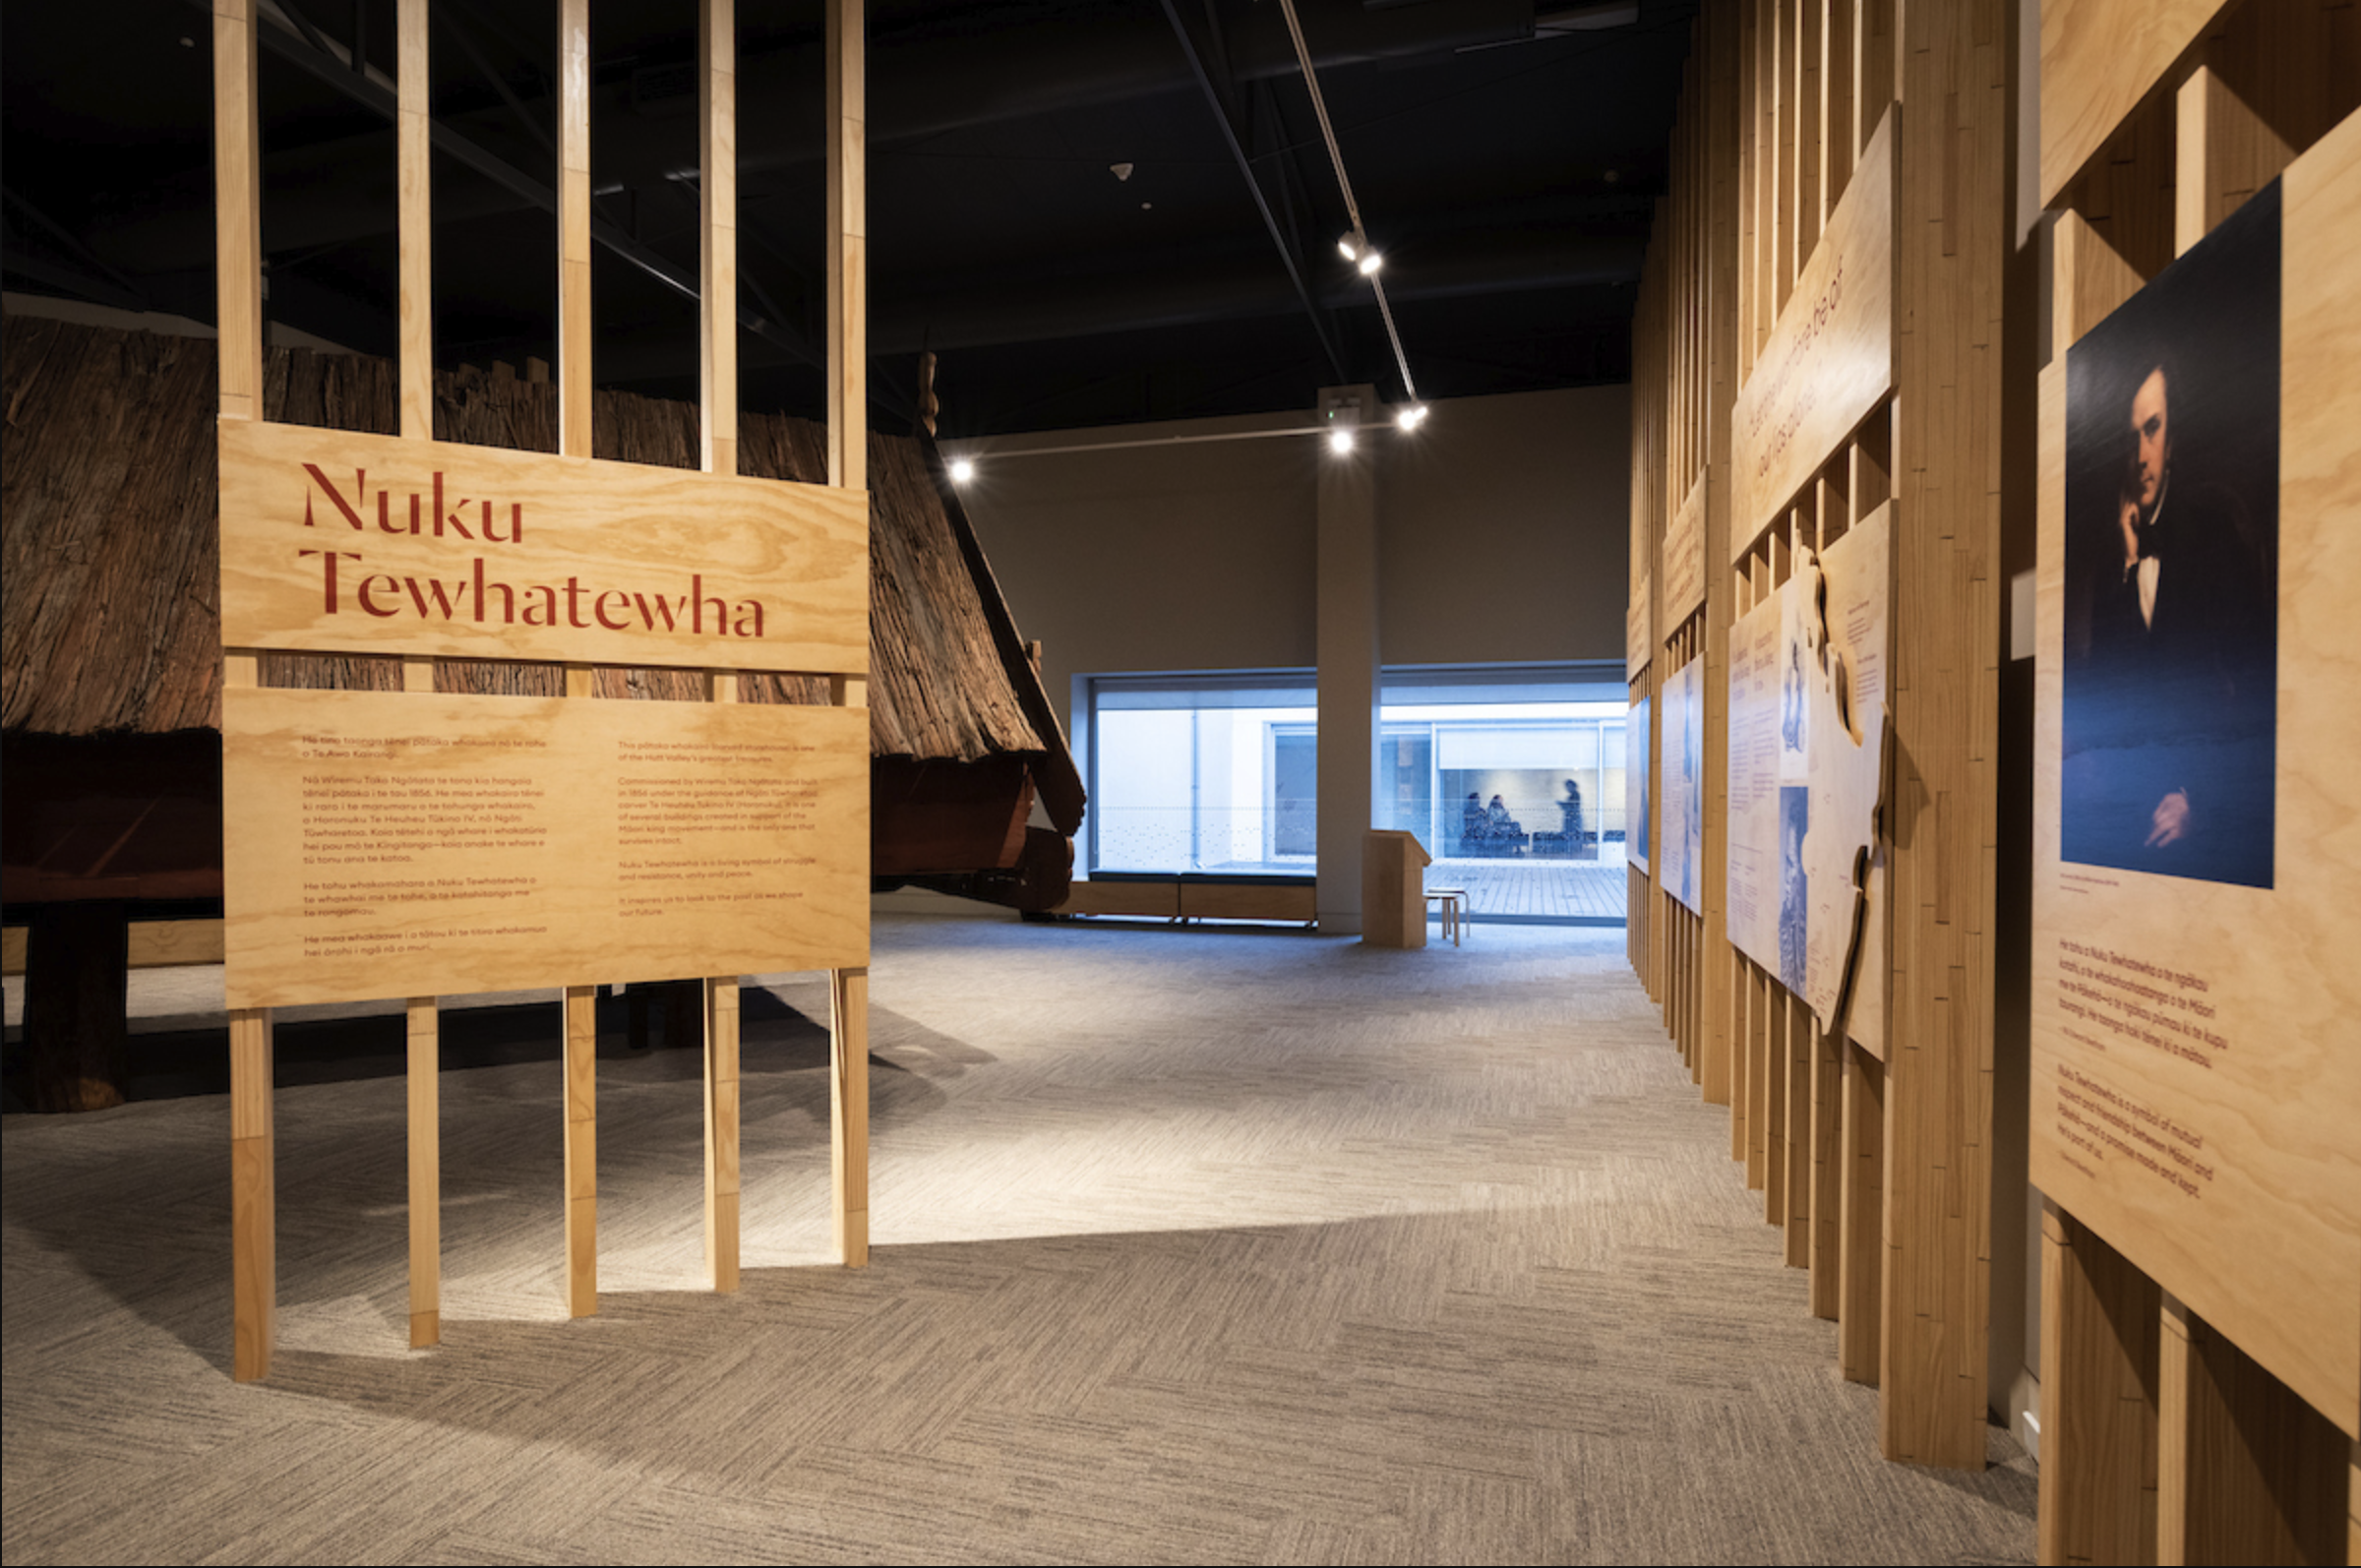 Alternate view of Nuku Tewhatewha exhibition, showing the main entrance and the courtyard. 